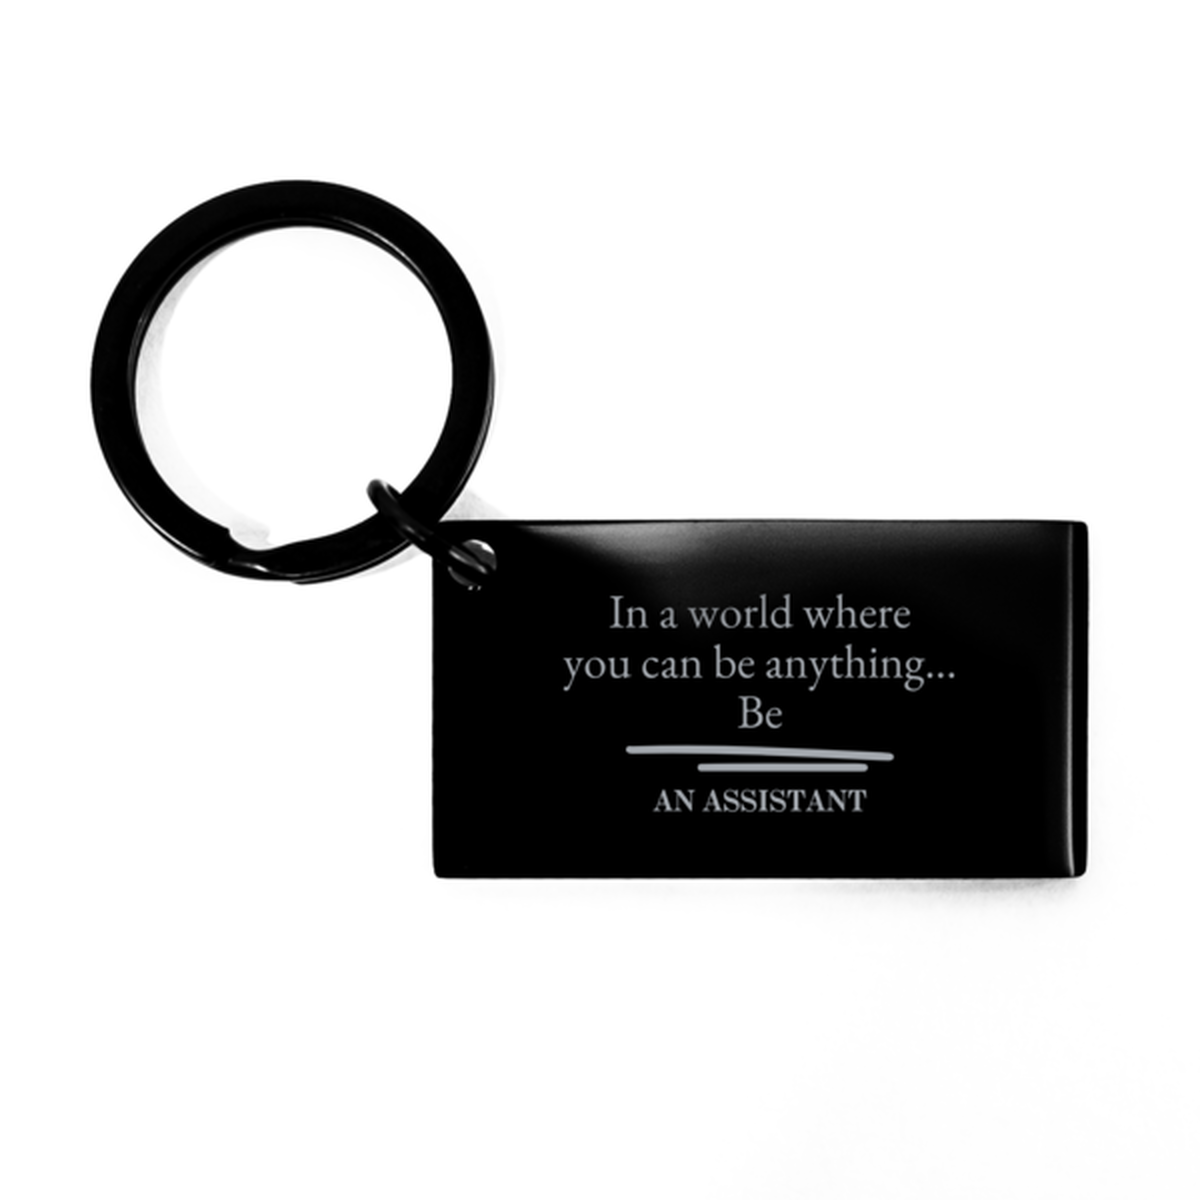 Gifts for Assistant, In a world where you can be anything, Appreciation Birthday Keychain for Men, Women, Friends, Coworkers